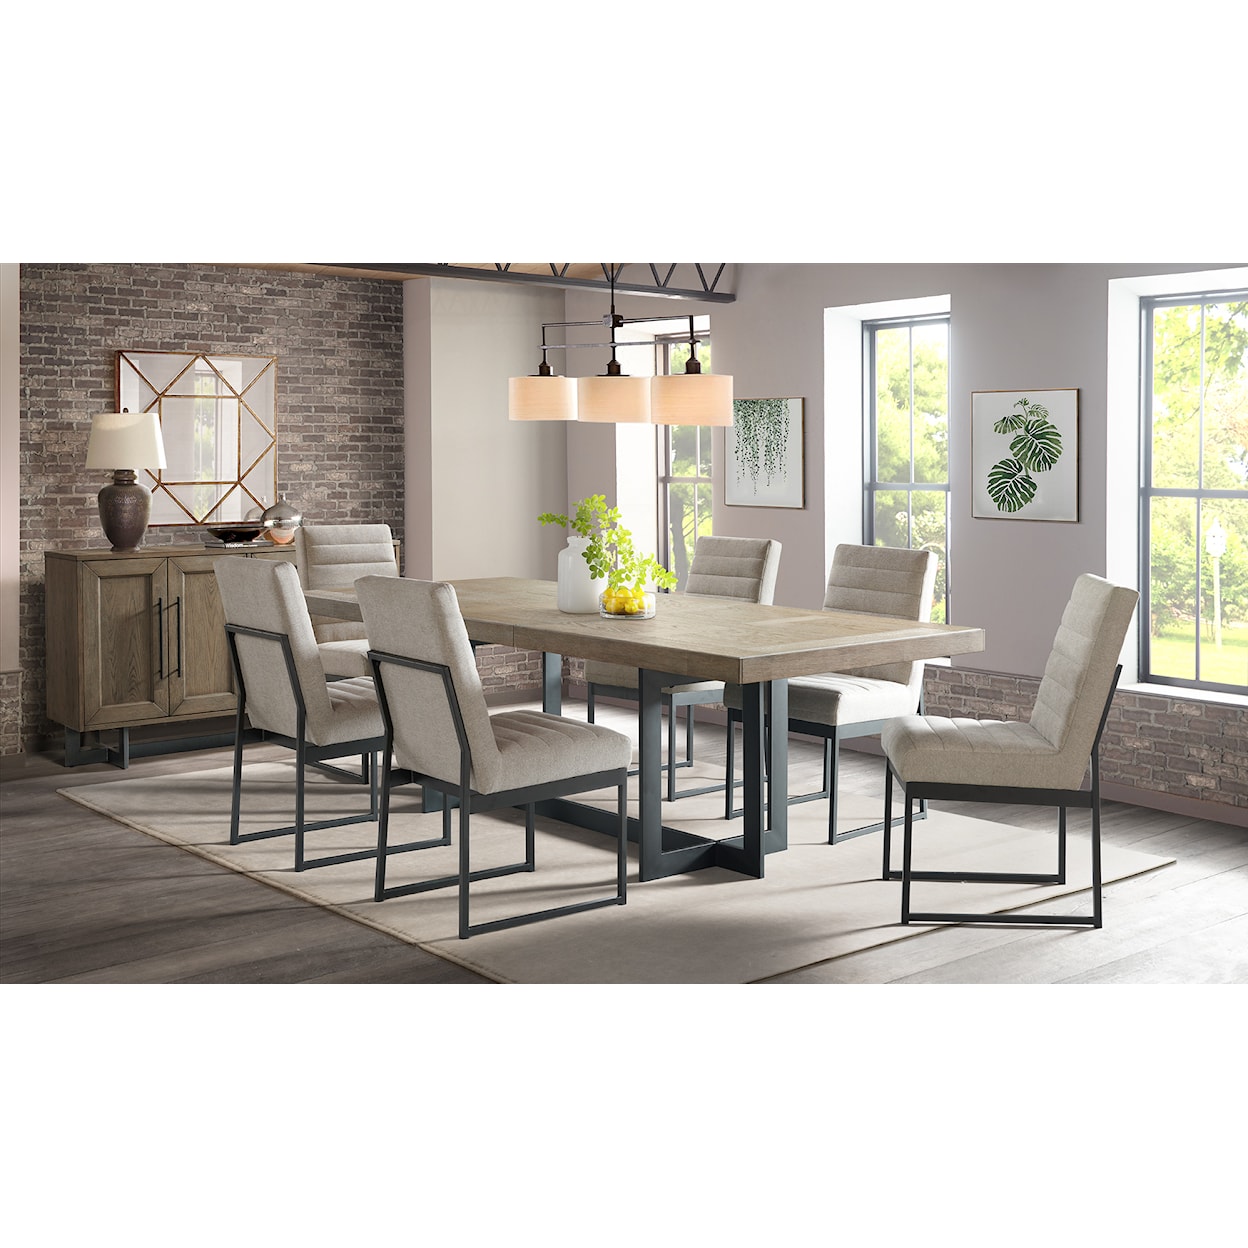 Intercon Eden Upholstered Dining Side Chair